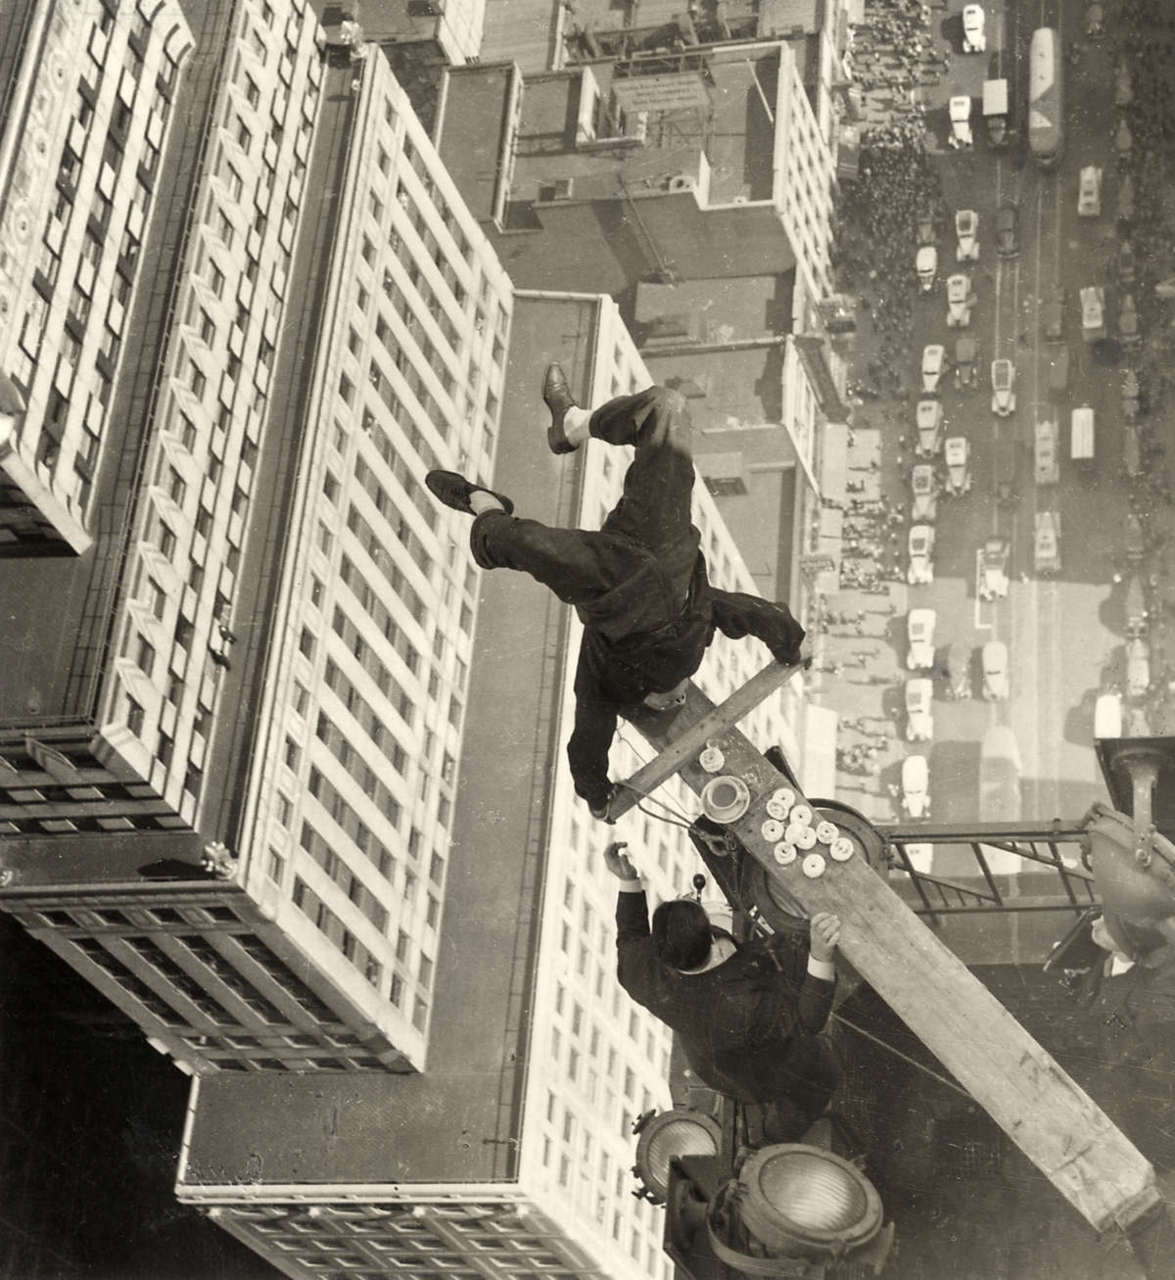 A man balances on a piece of wood at the edge of a skyscraper in Chicago, US in 1938.